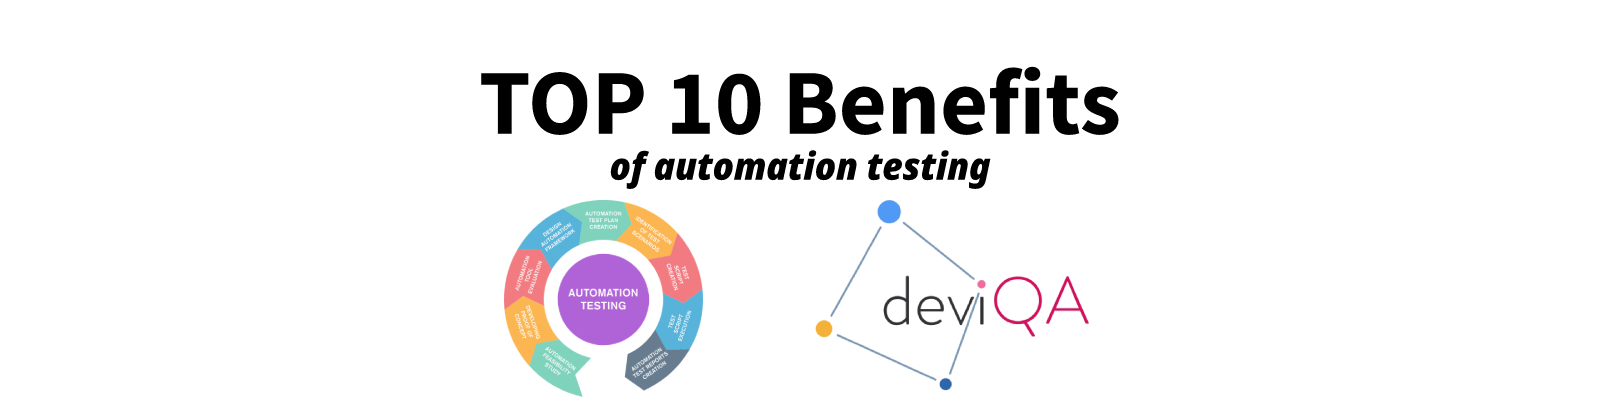 Top 10 Benefits of automation testing